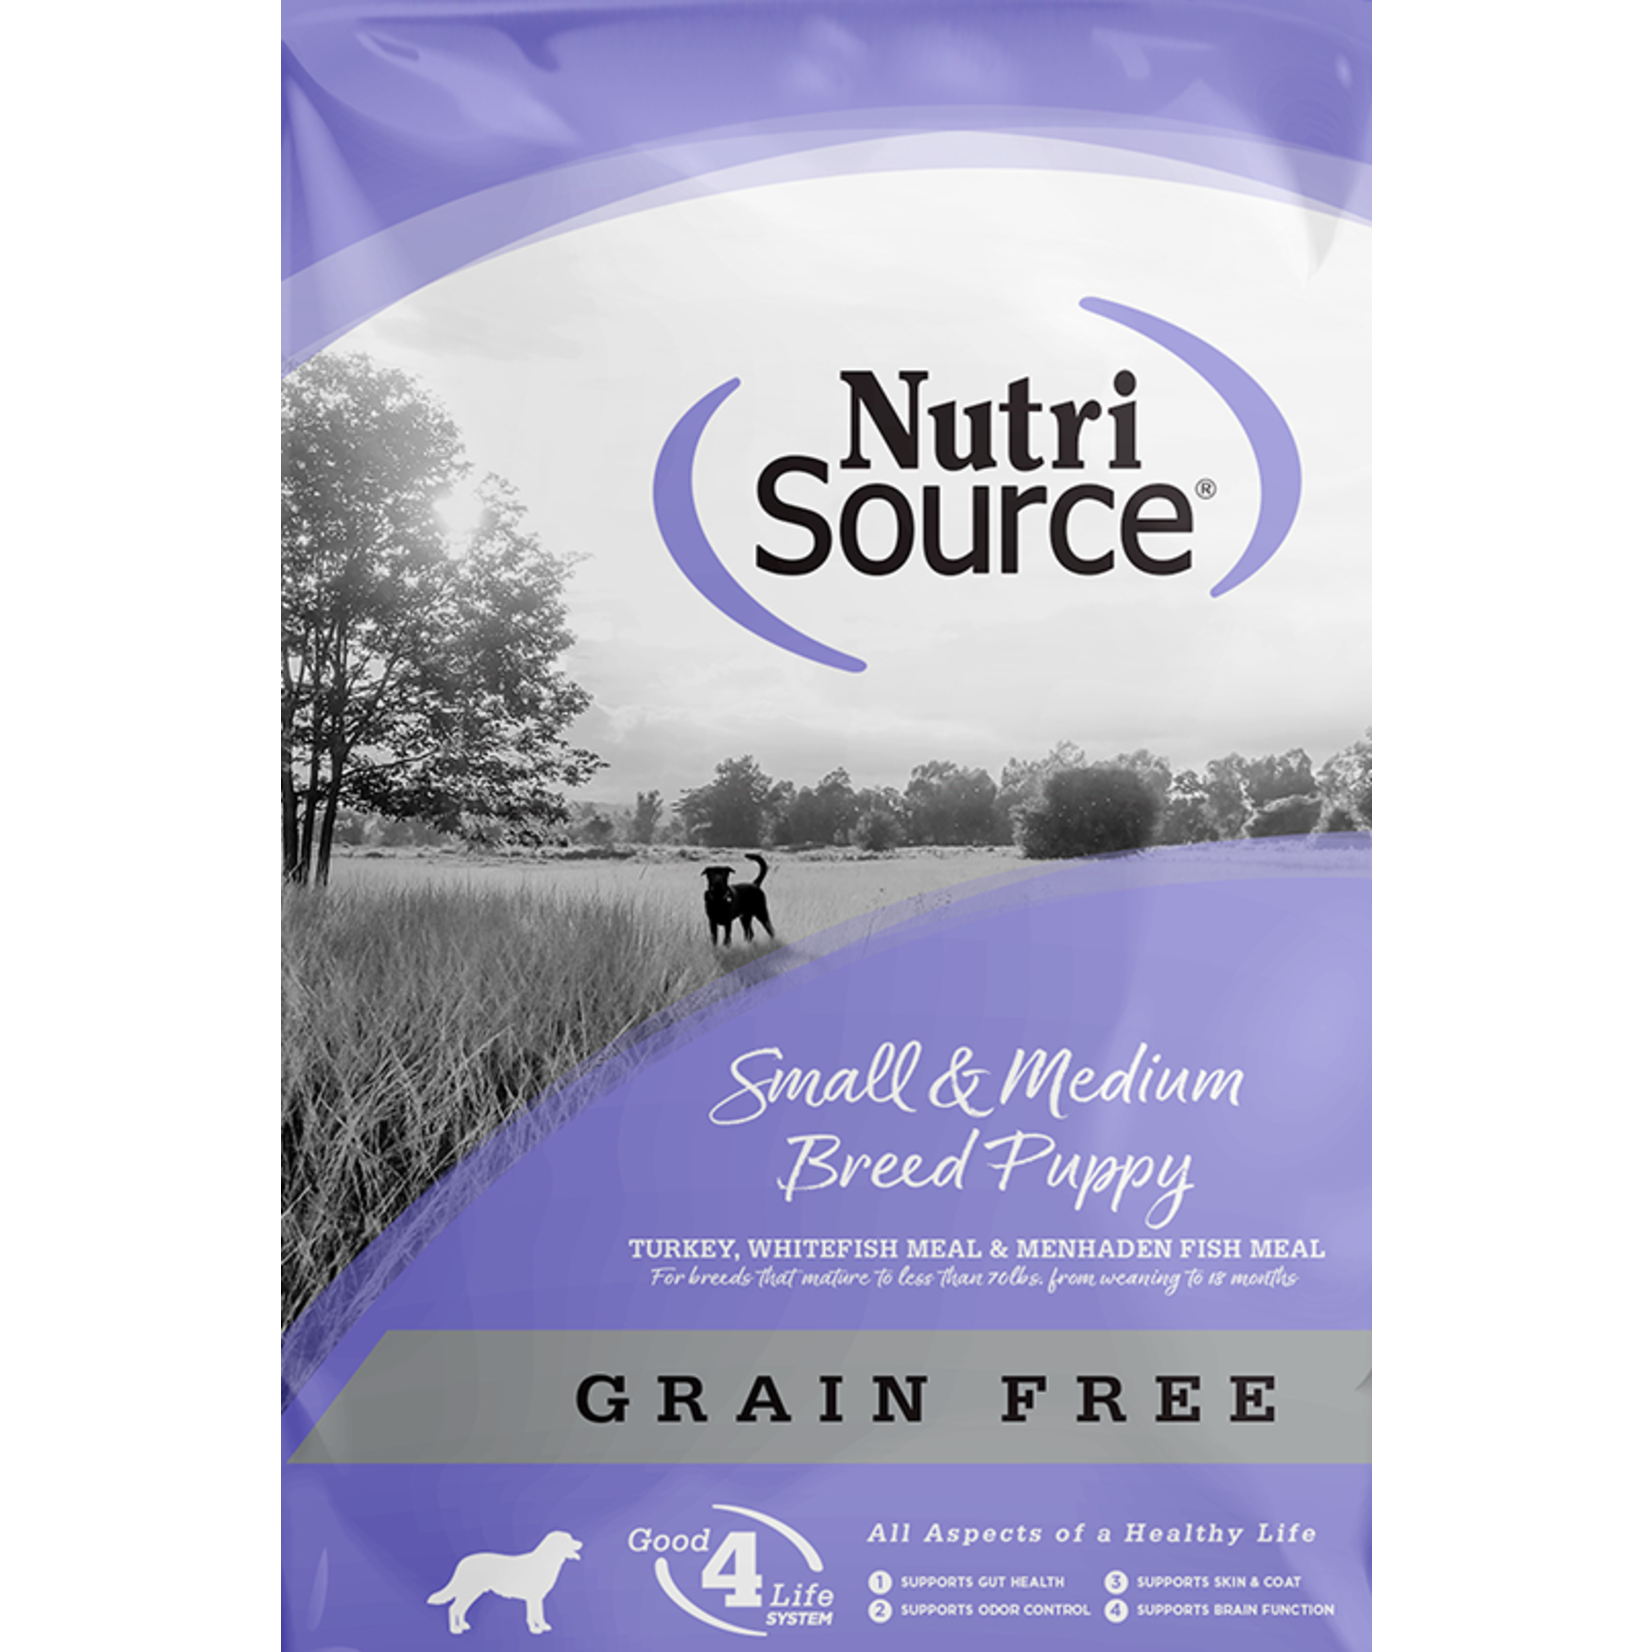 NUTRI SOURCE NUTRISOURCE. Grain-Free Large Breed Puppy 5LB